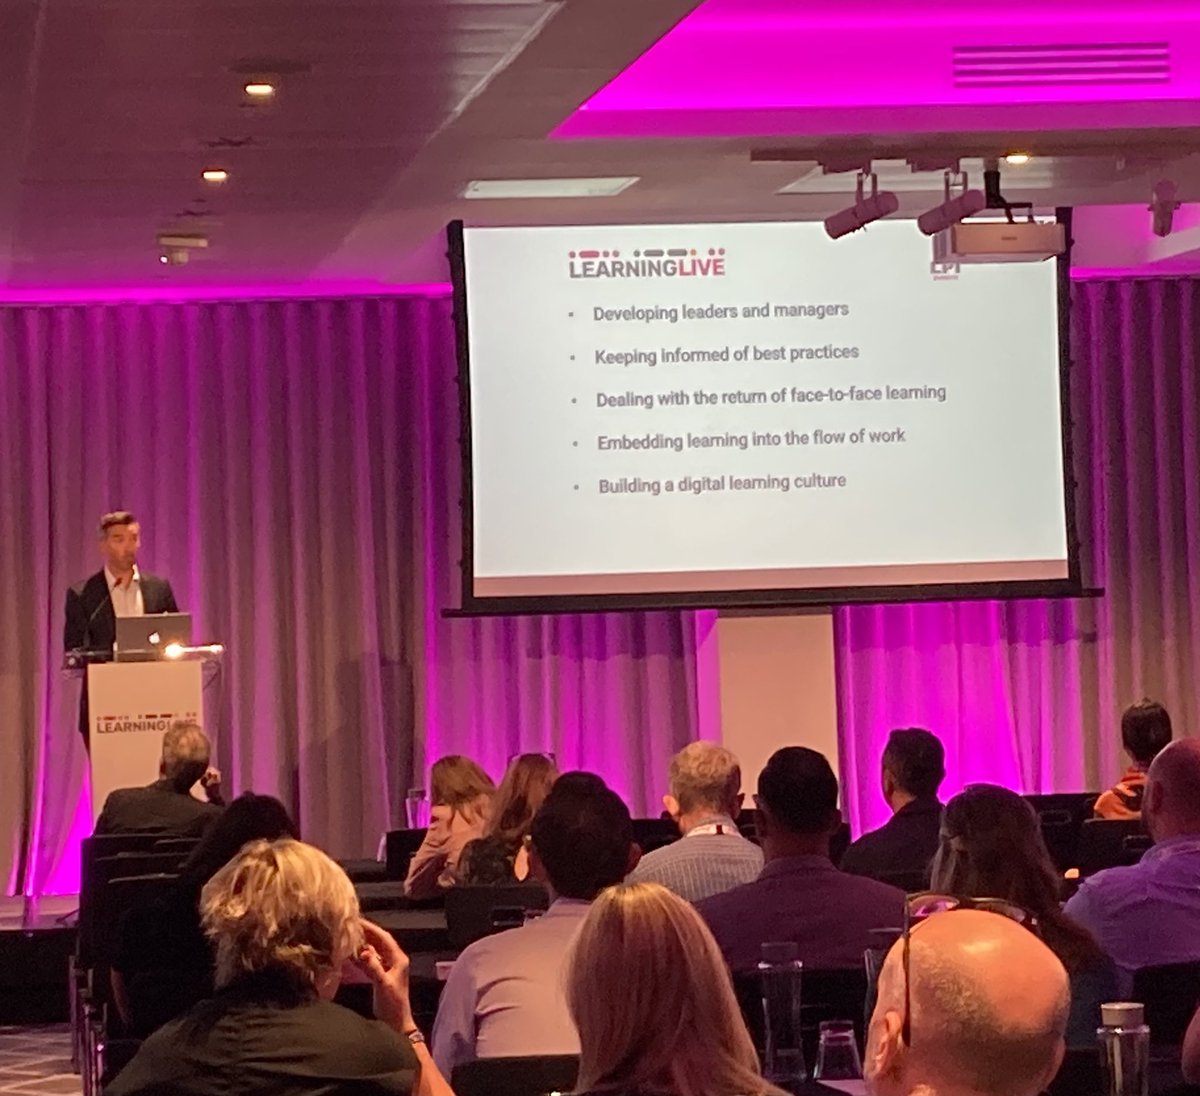 CEO of the @YourLPI @edmundmonk opening the 2nd day of #Learninglive and re sharing the top global CLO/Heads of Learning challenges (in reverse order) Here’s to another great day of #learning conversations